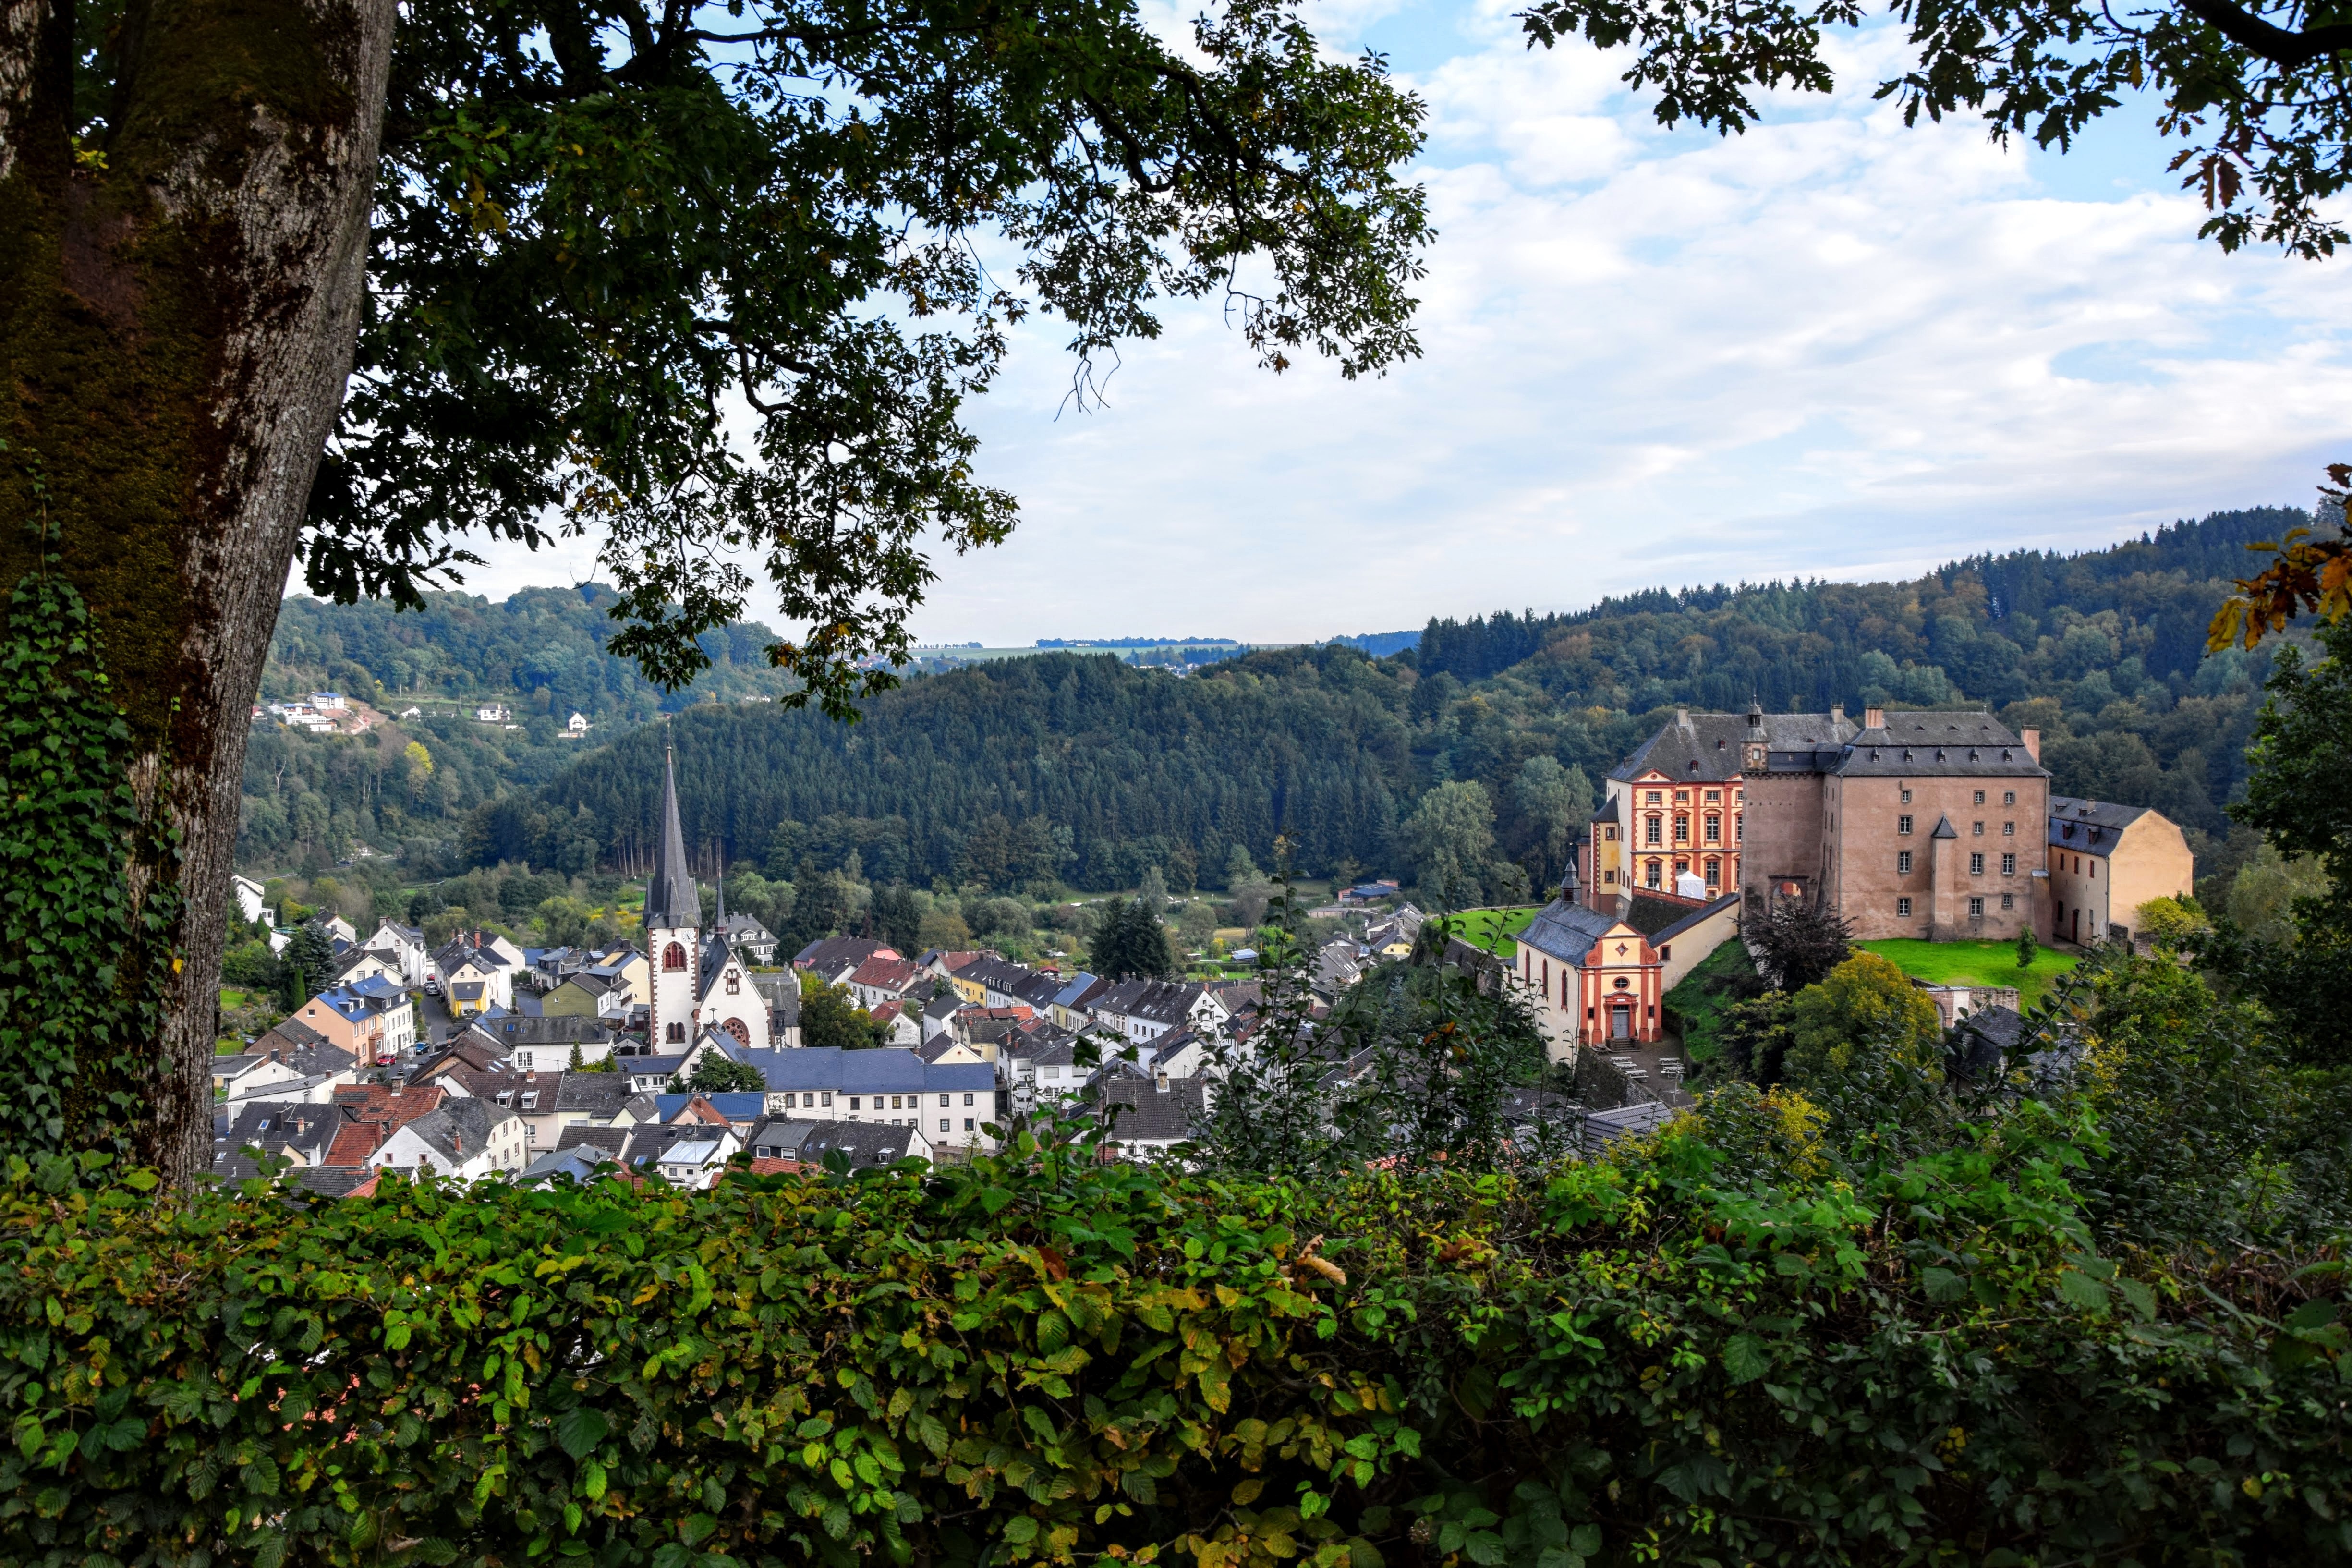 germany, trees, cities, architecture, building, malberg